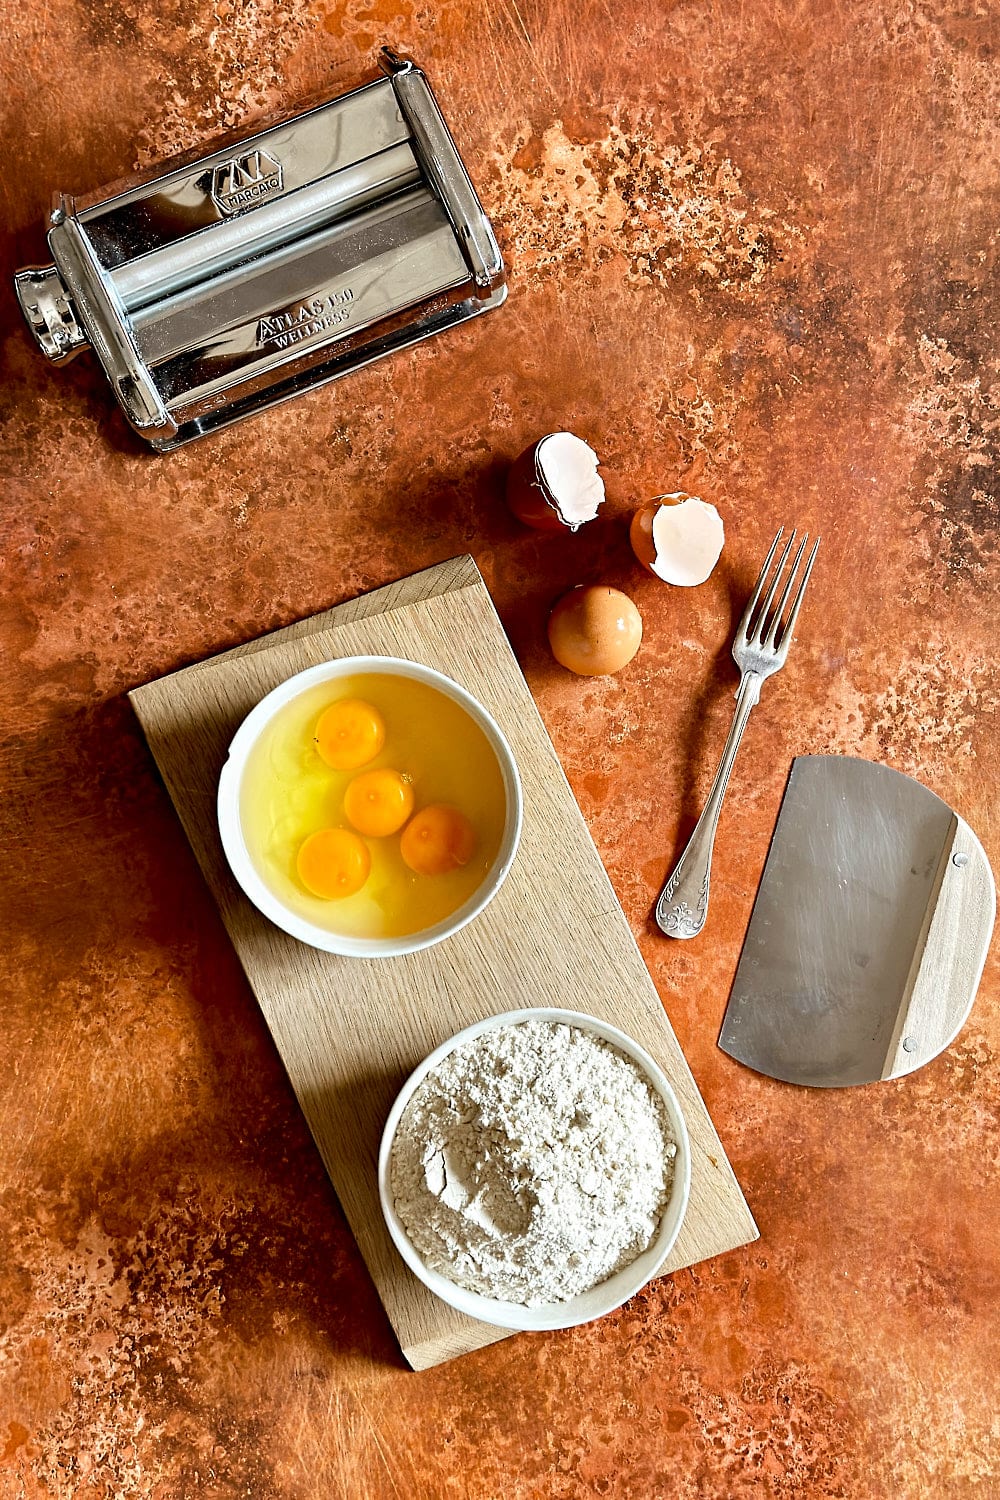 The tools and ingredients needed to make homemade tagliatelle: Flour, eggs, bench scraper, fork and pasta machine.